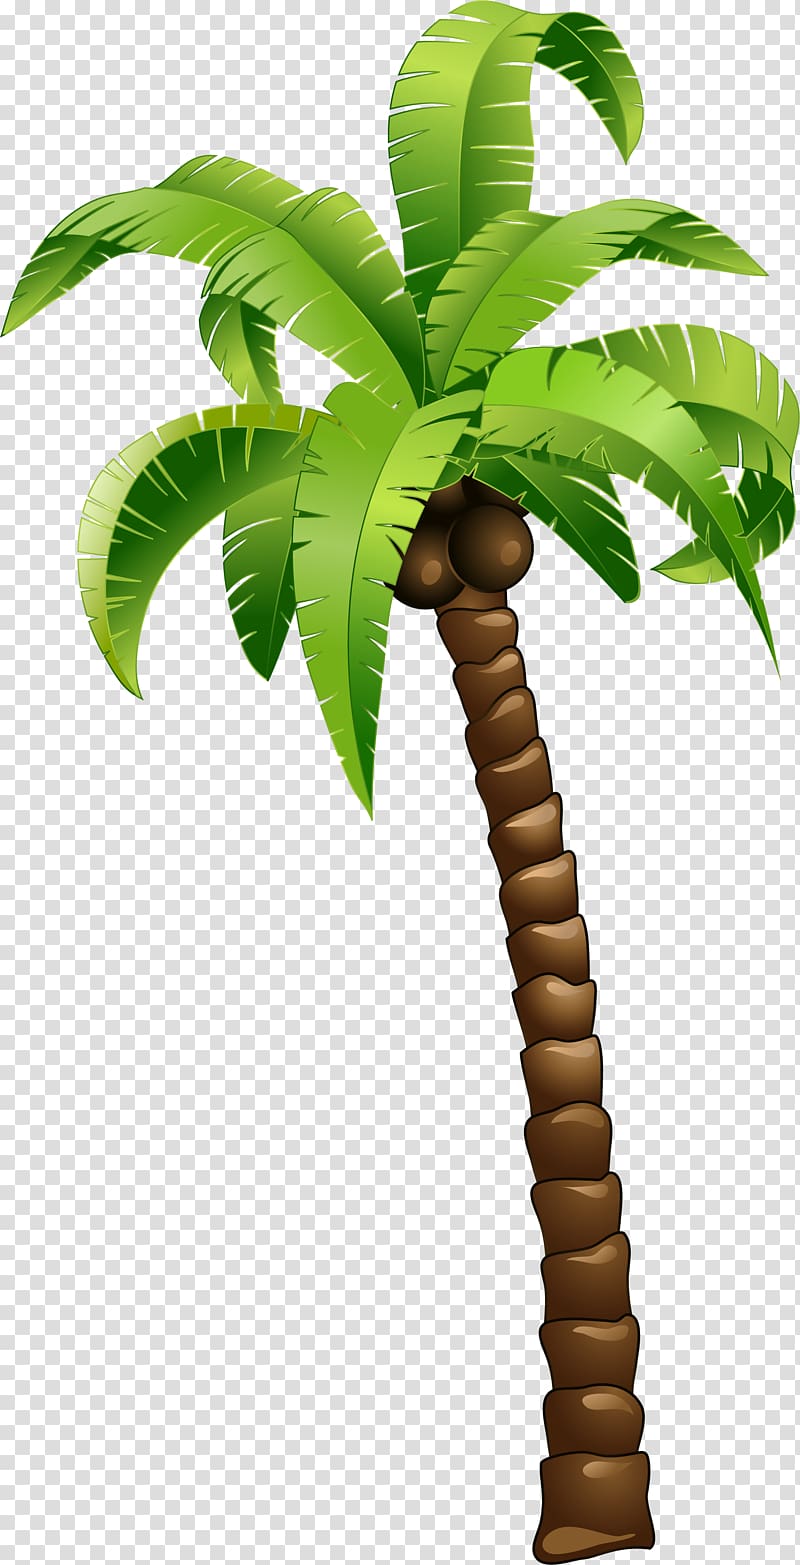 coconut tree , Coconut Tree, Cartoon green coconut tree transparent background PNG clipart